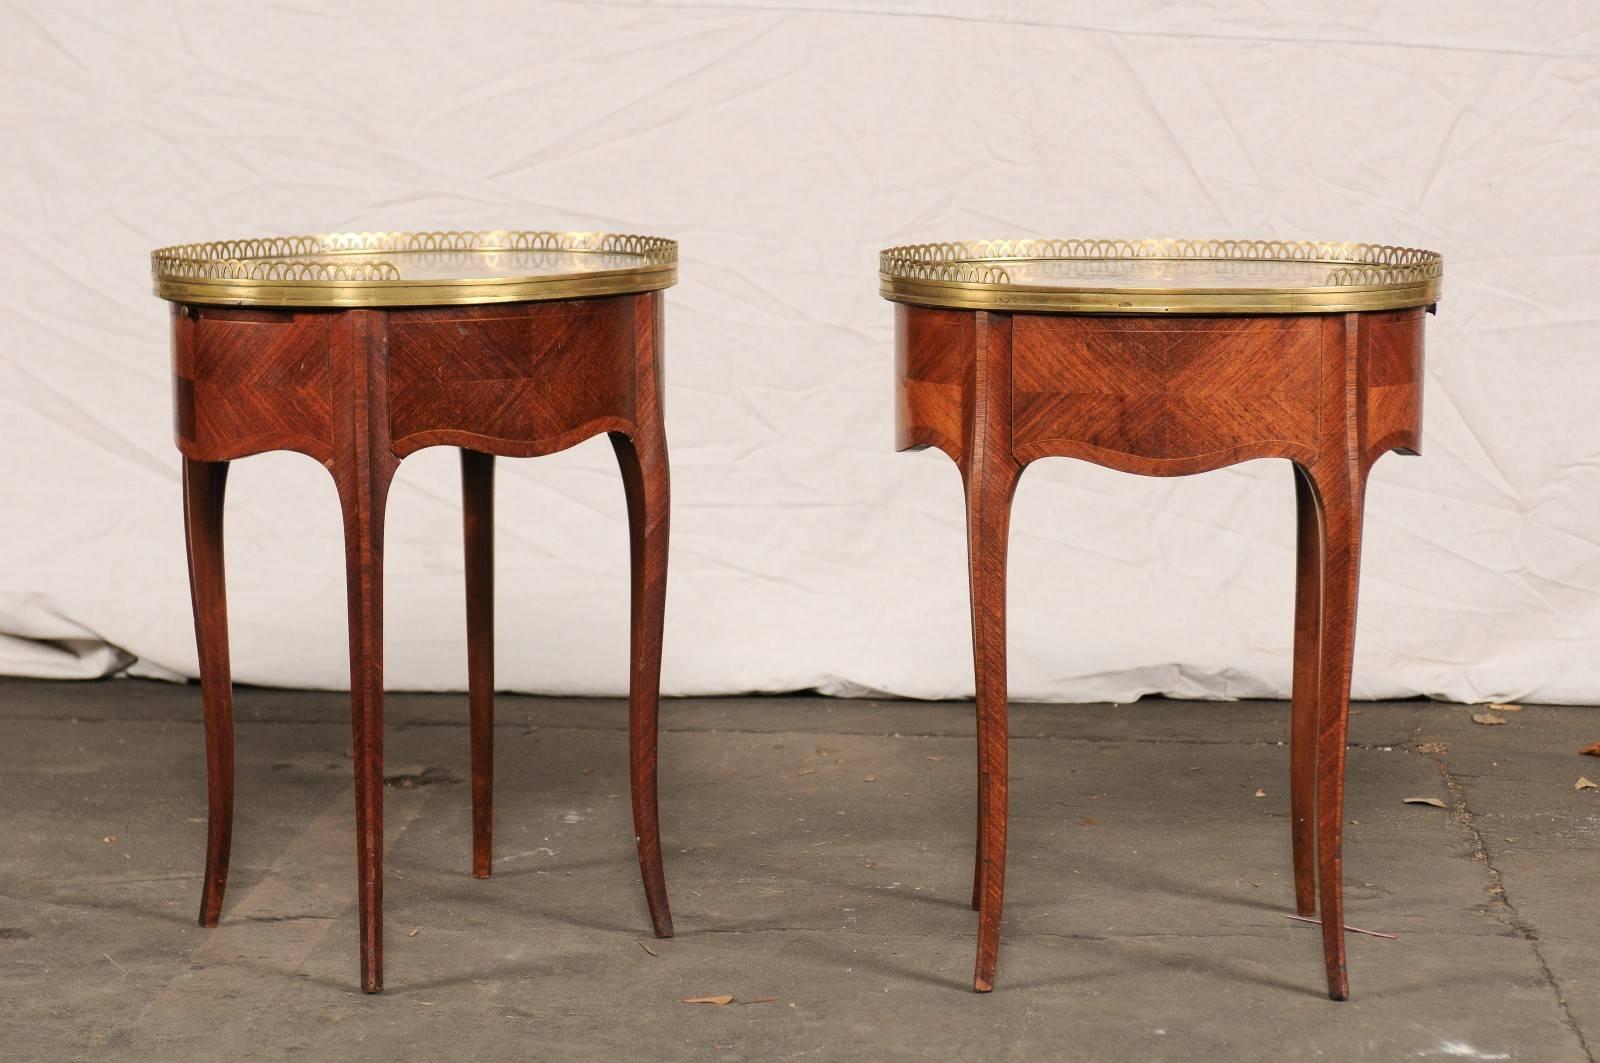 Pair of circa 1900 French marble-top, bronze gallery tables with drawers.